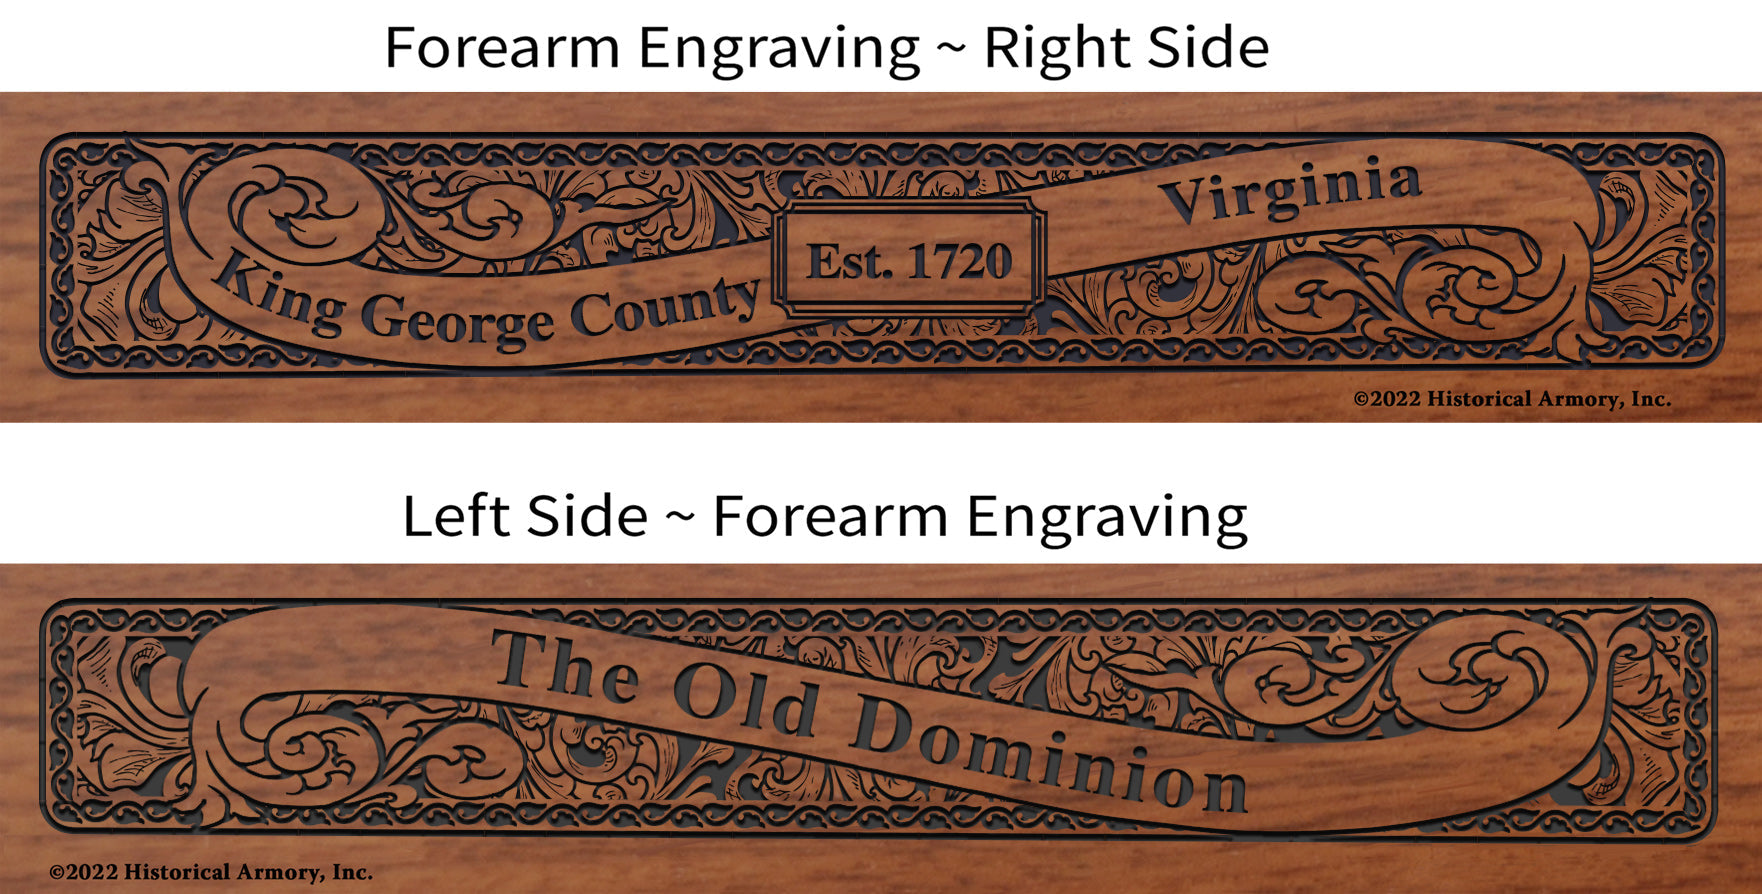 King George County Virginia Engraved Rifle Forearm